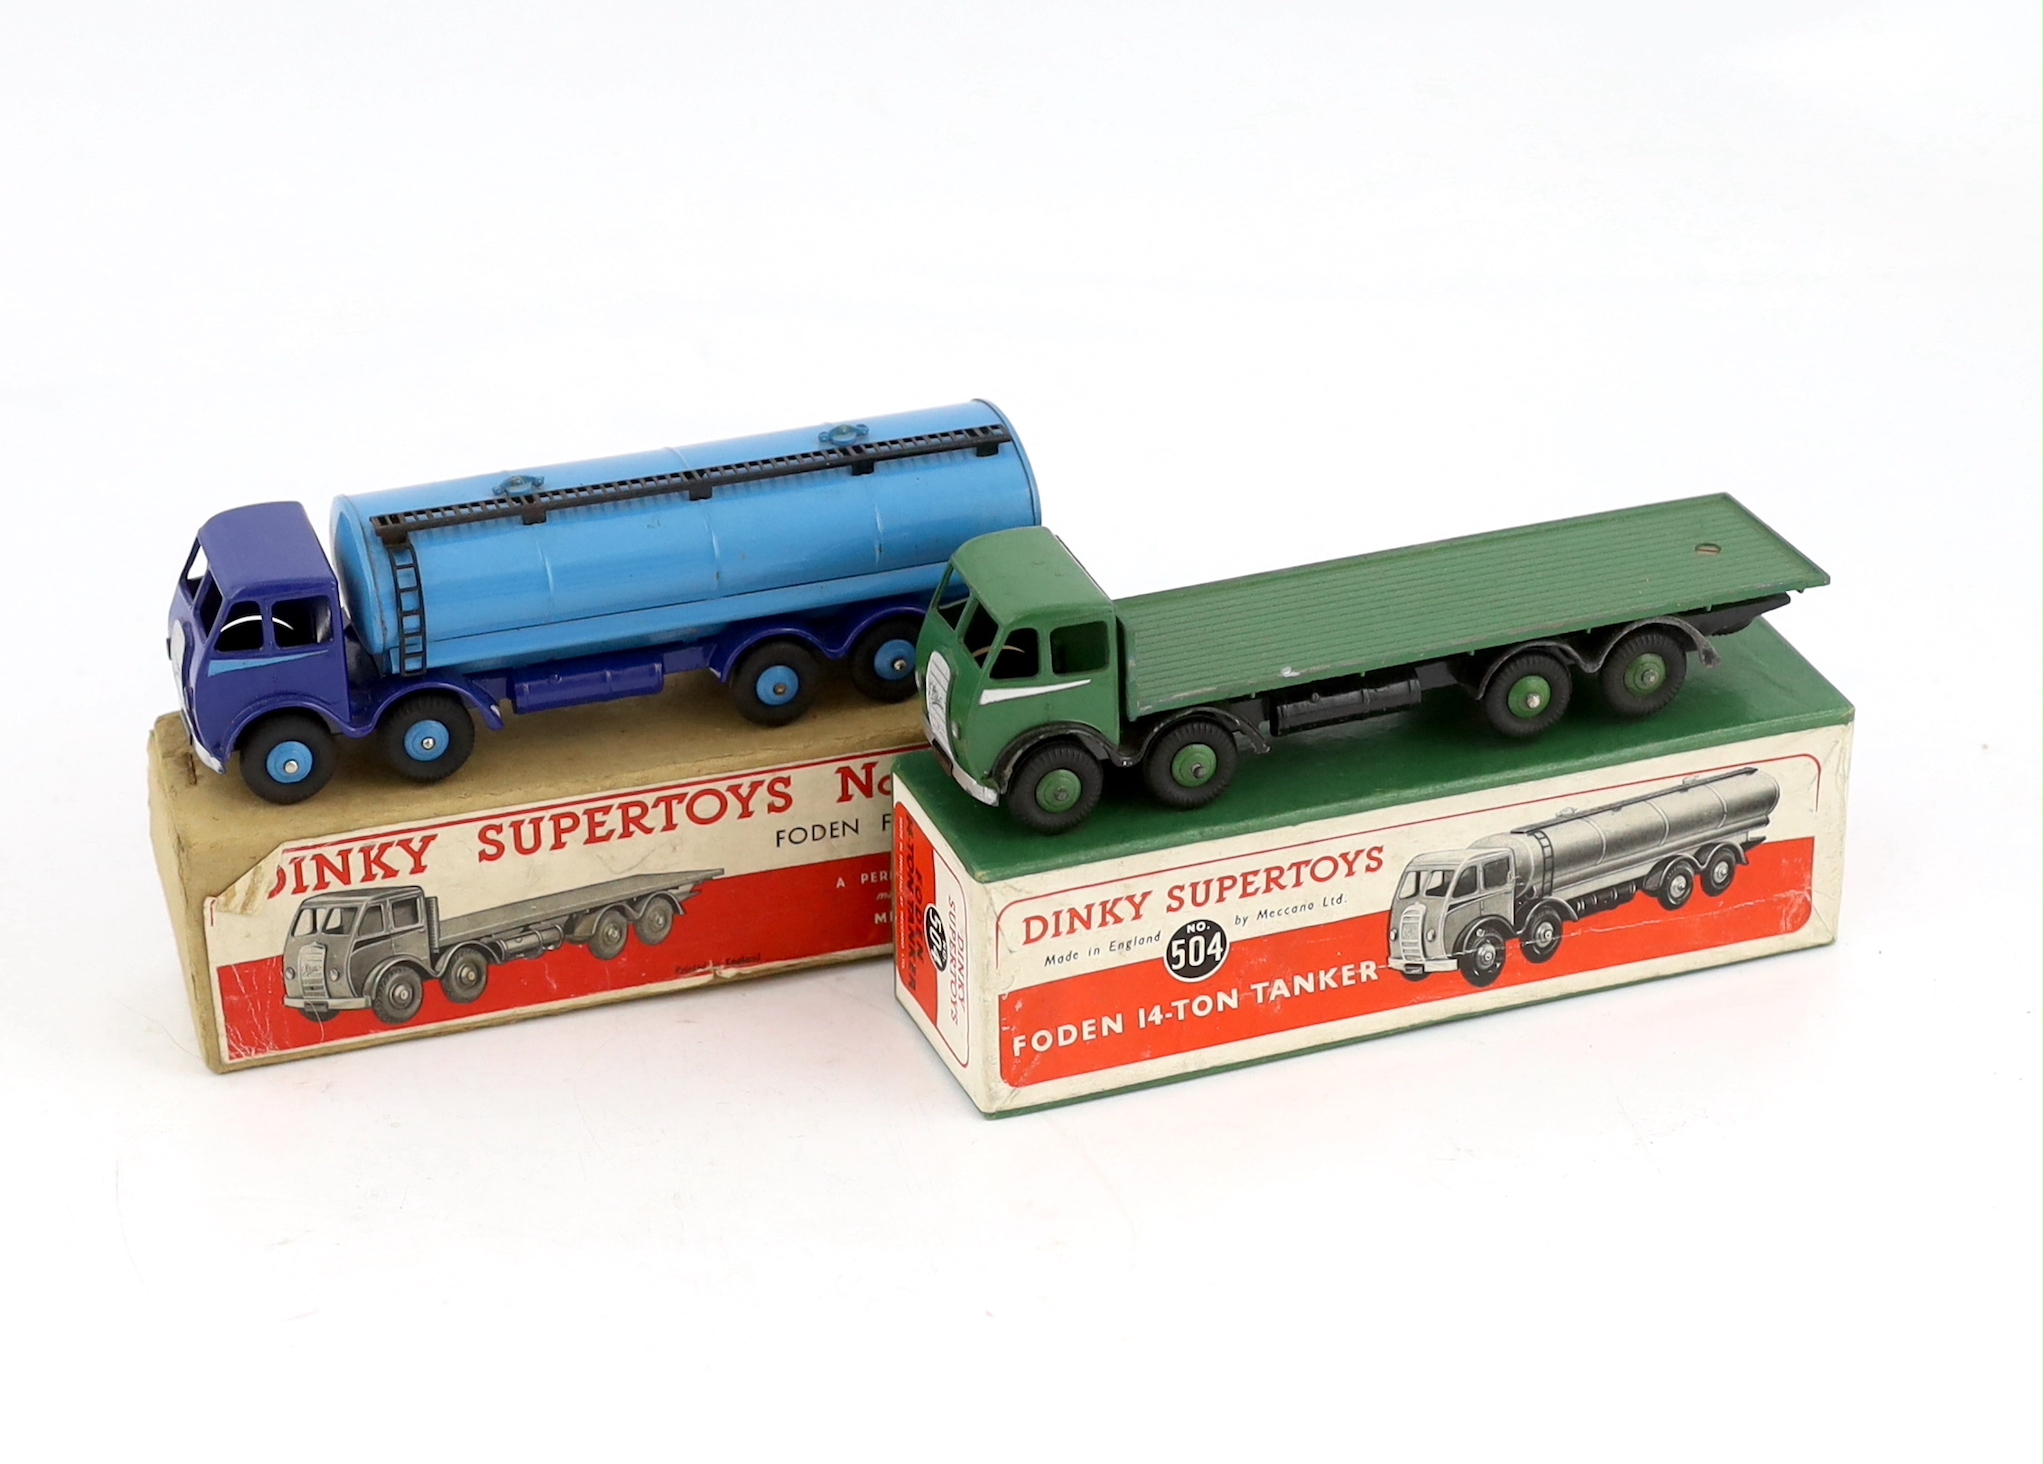 Two boxed Dinky Supertoys first type Fodens; a 14-ton tanker (504), with dark blue cab and - Bild 3 aus 4